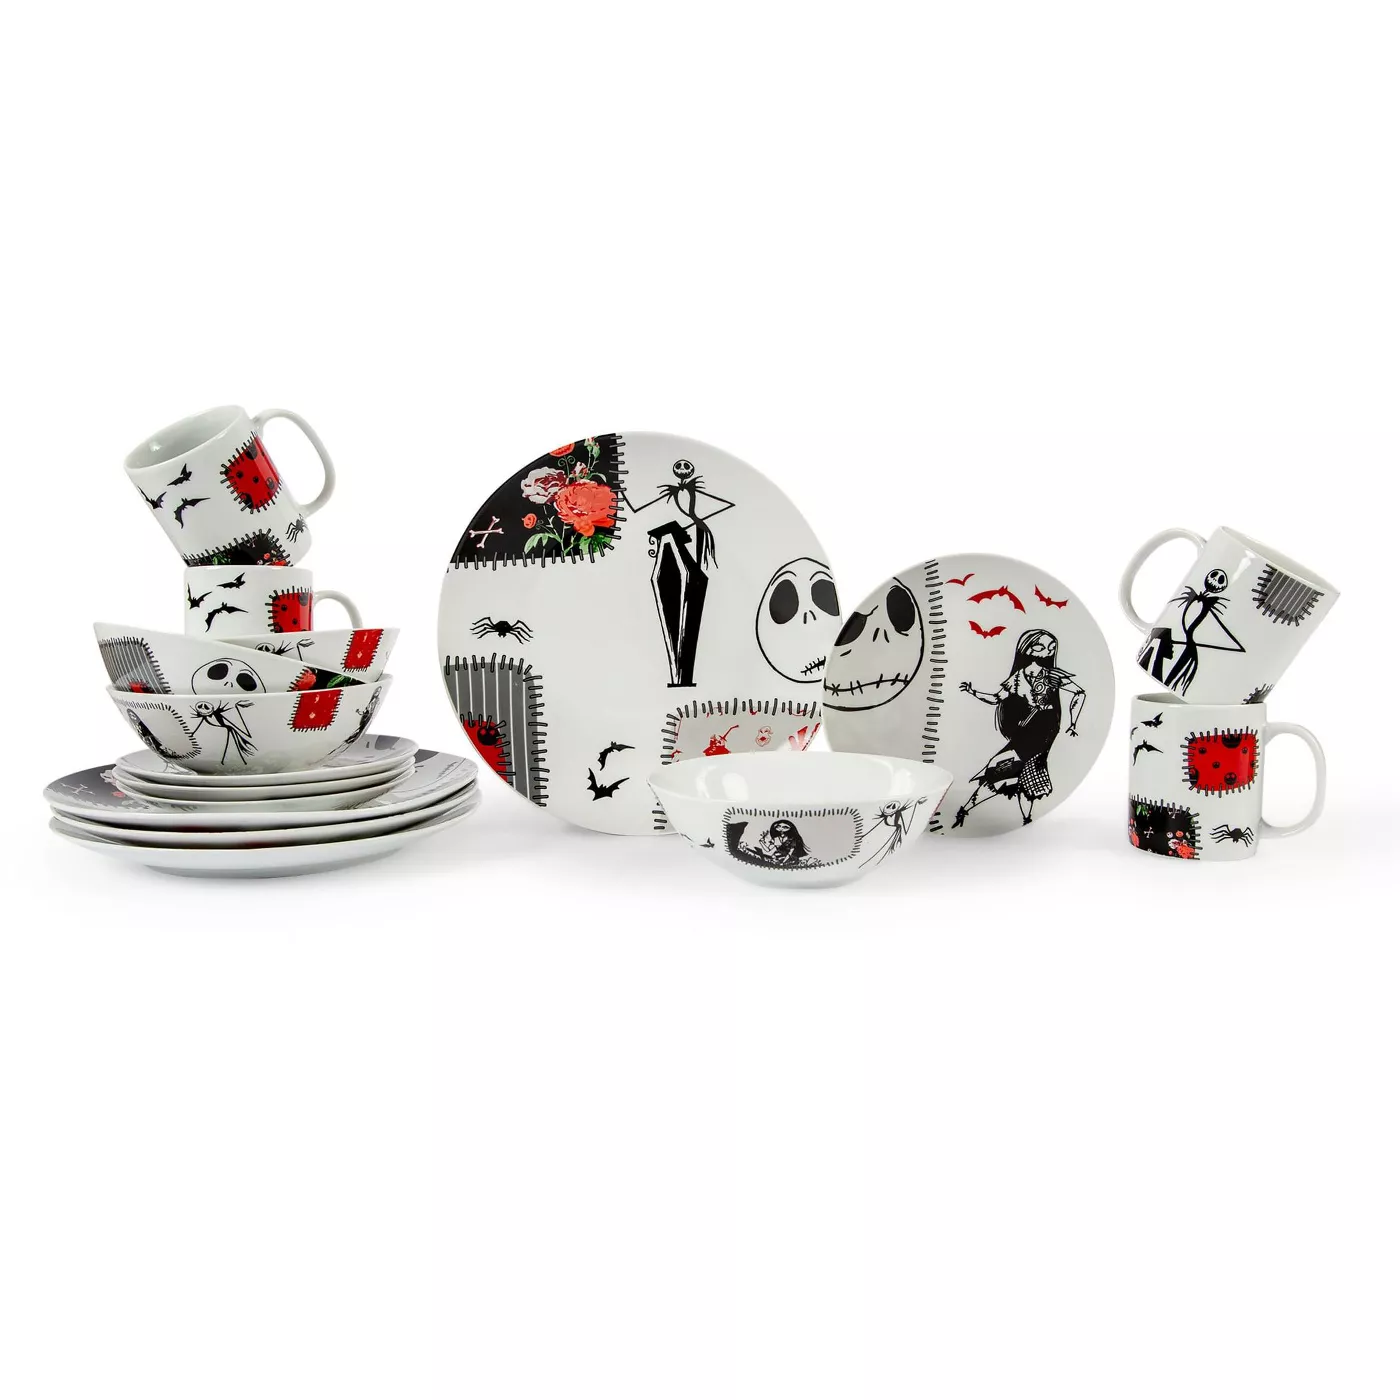 Seven20 The Nightmare Before Christmas Patched Up 16-Piece Dinnerware Set - image 1 of 7